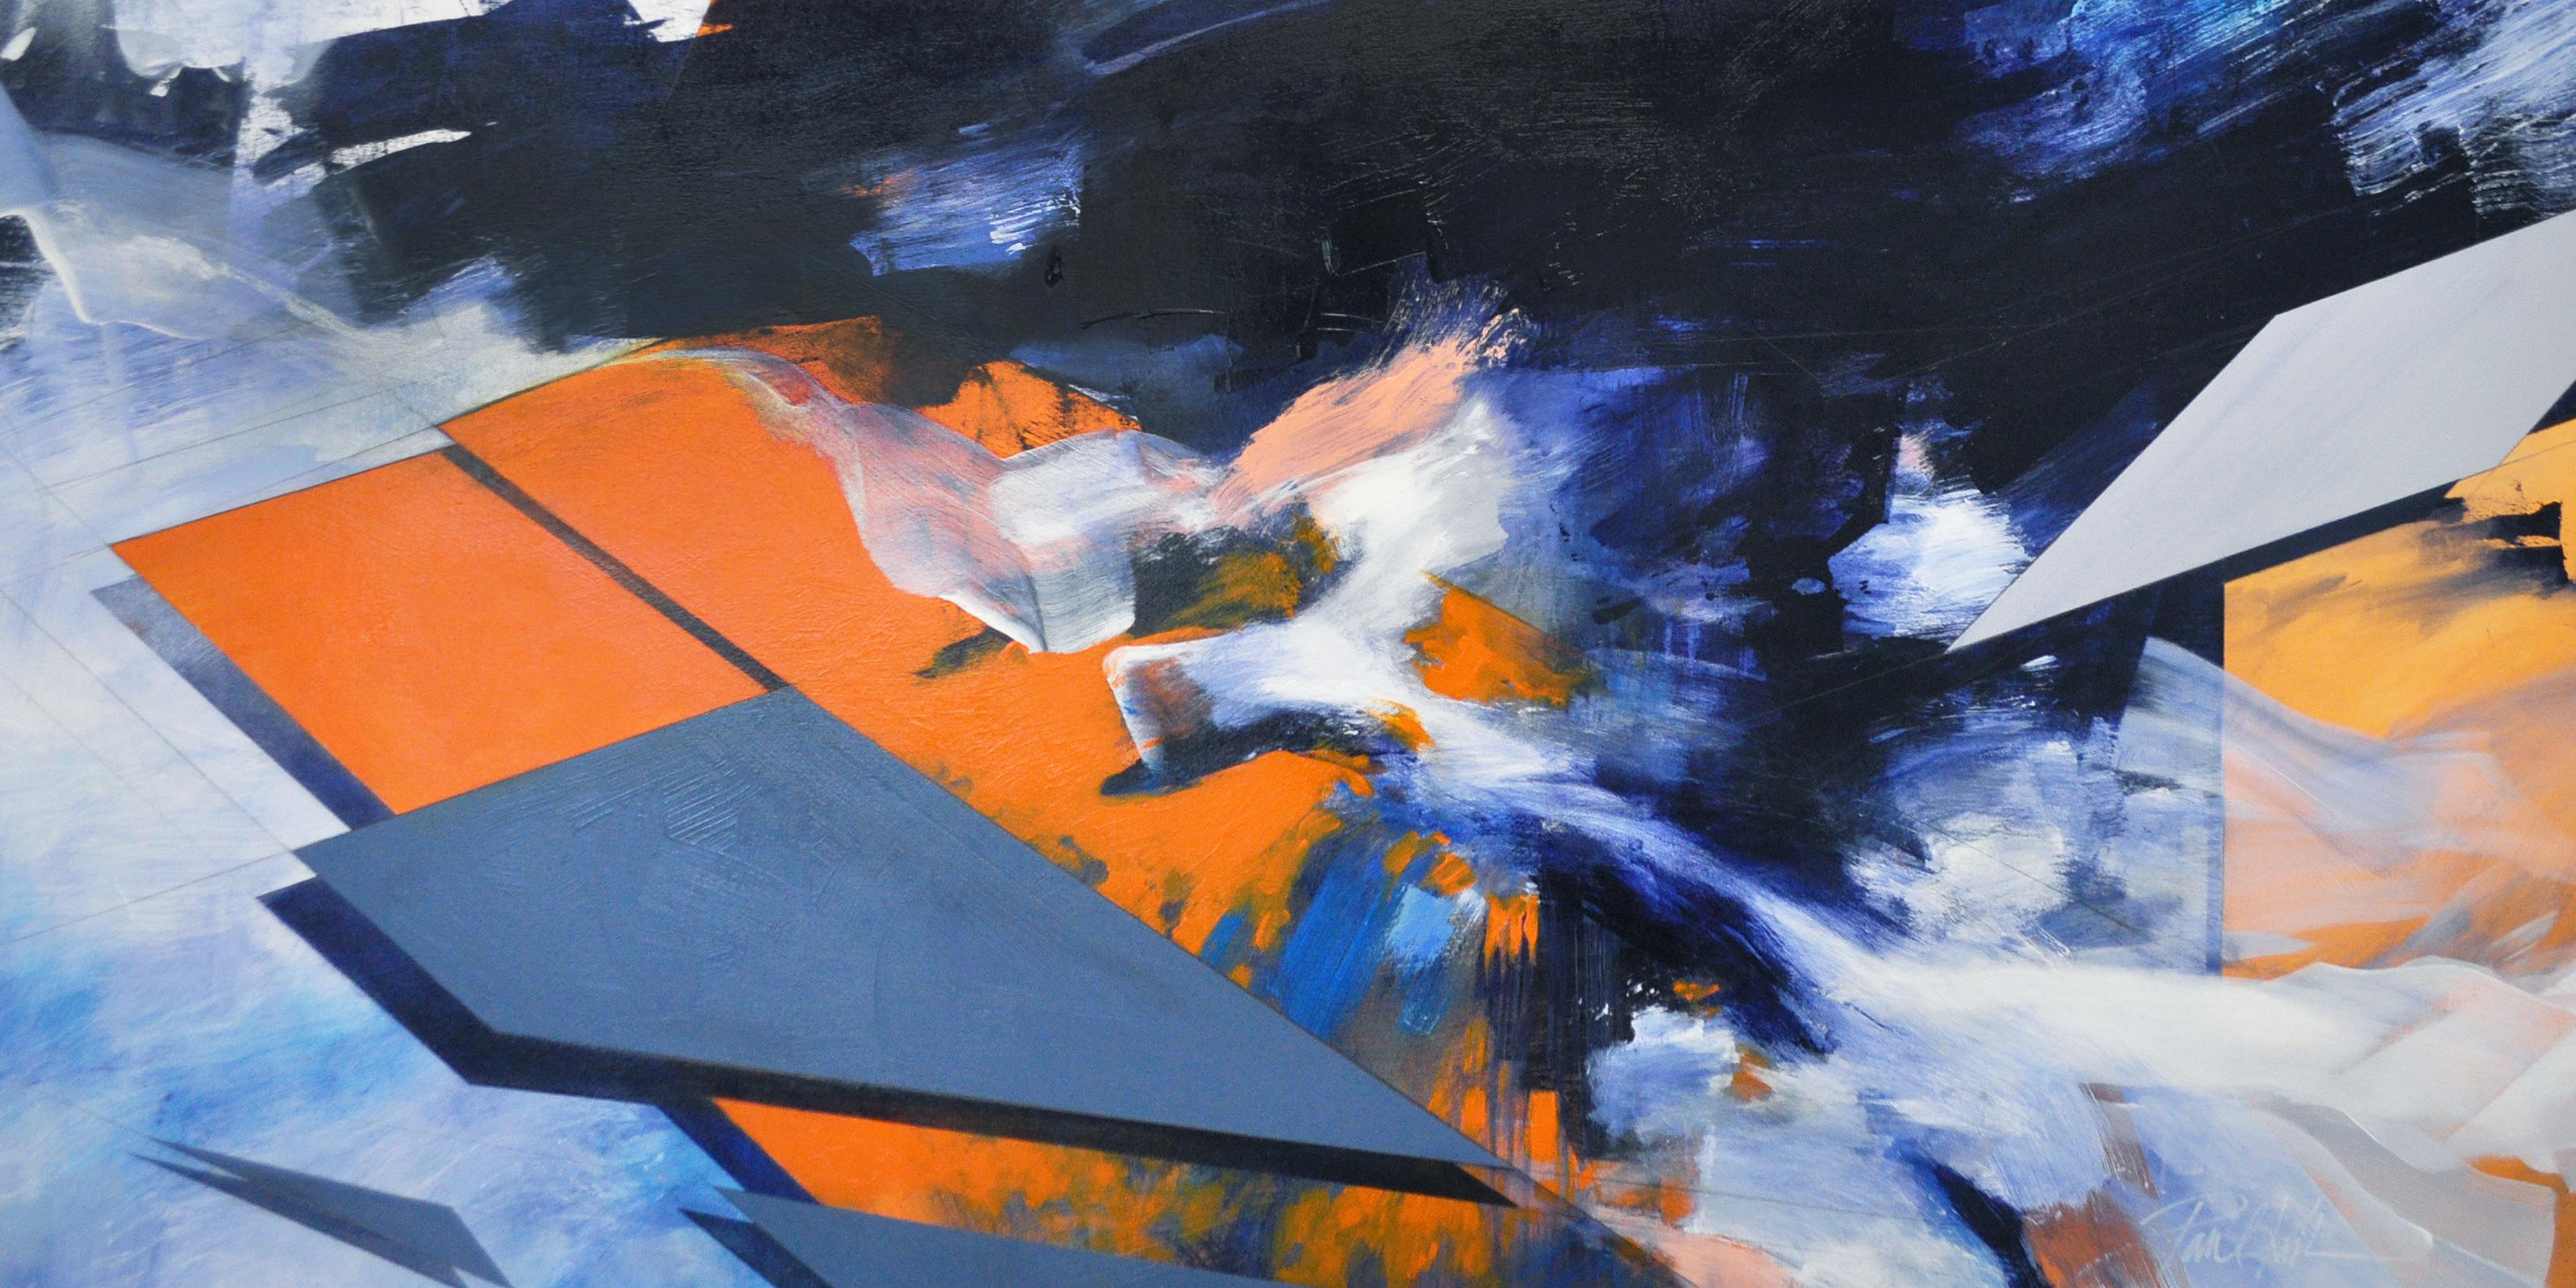 <p>Artist Comments<br />Geometric and organic elements flow together in this striking abstract, blending elements of land and sky. Bright orange planes provide compelling balance to the varied blues. "Loose, energetic, and full of motion, this piece